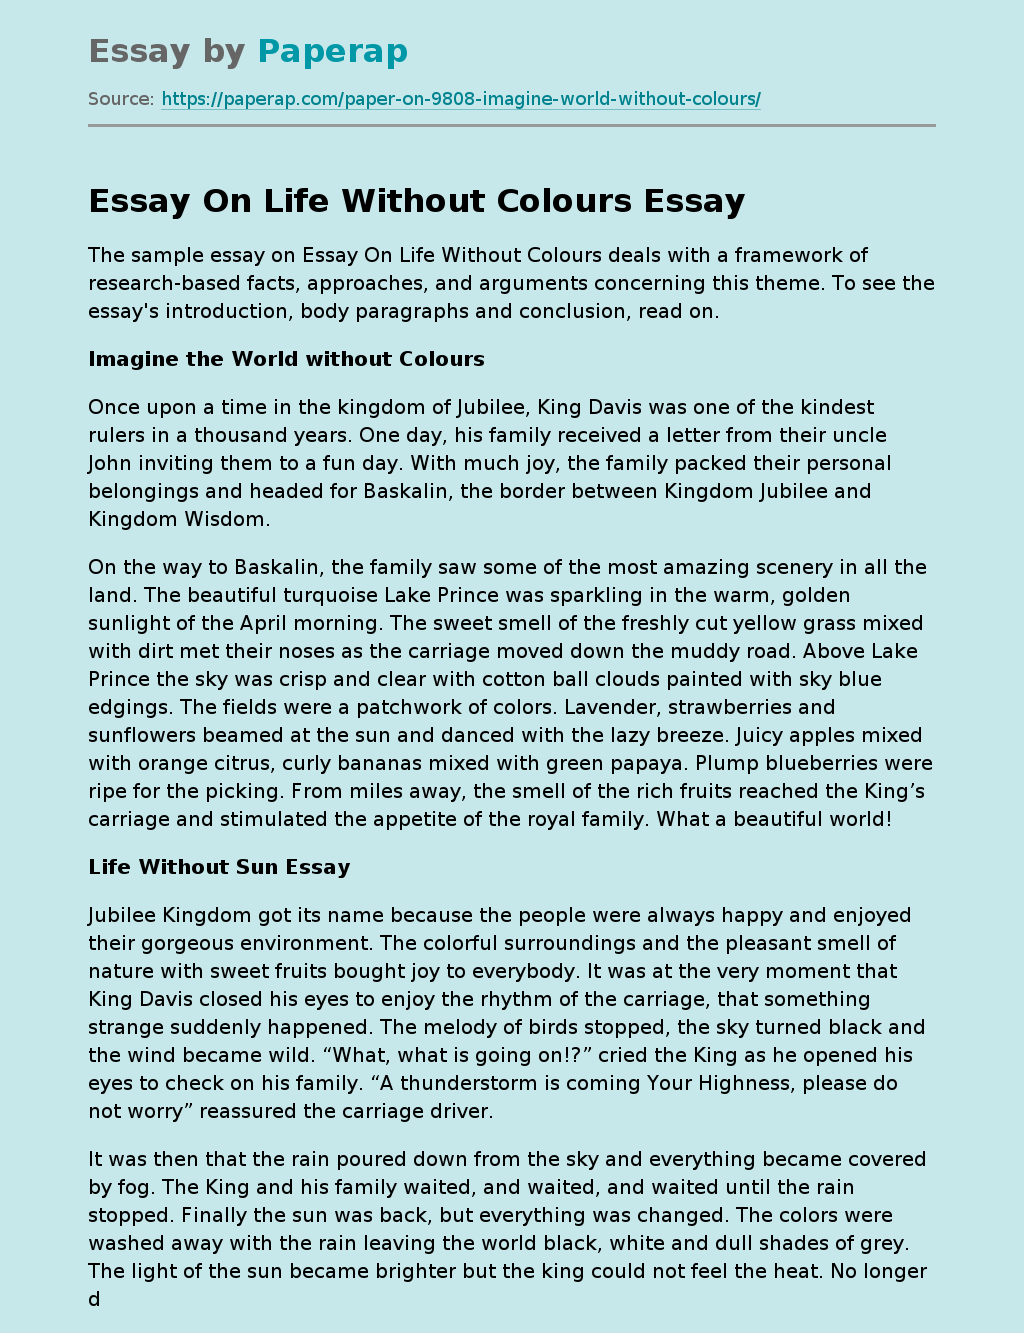 Essay On Life Without Colours